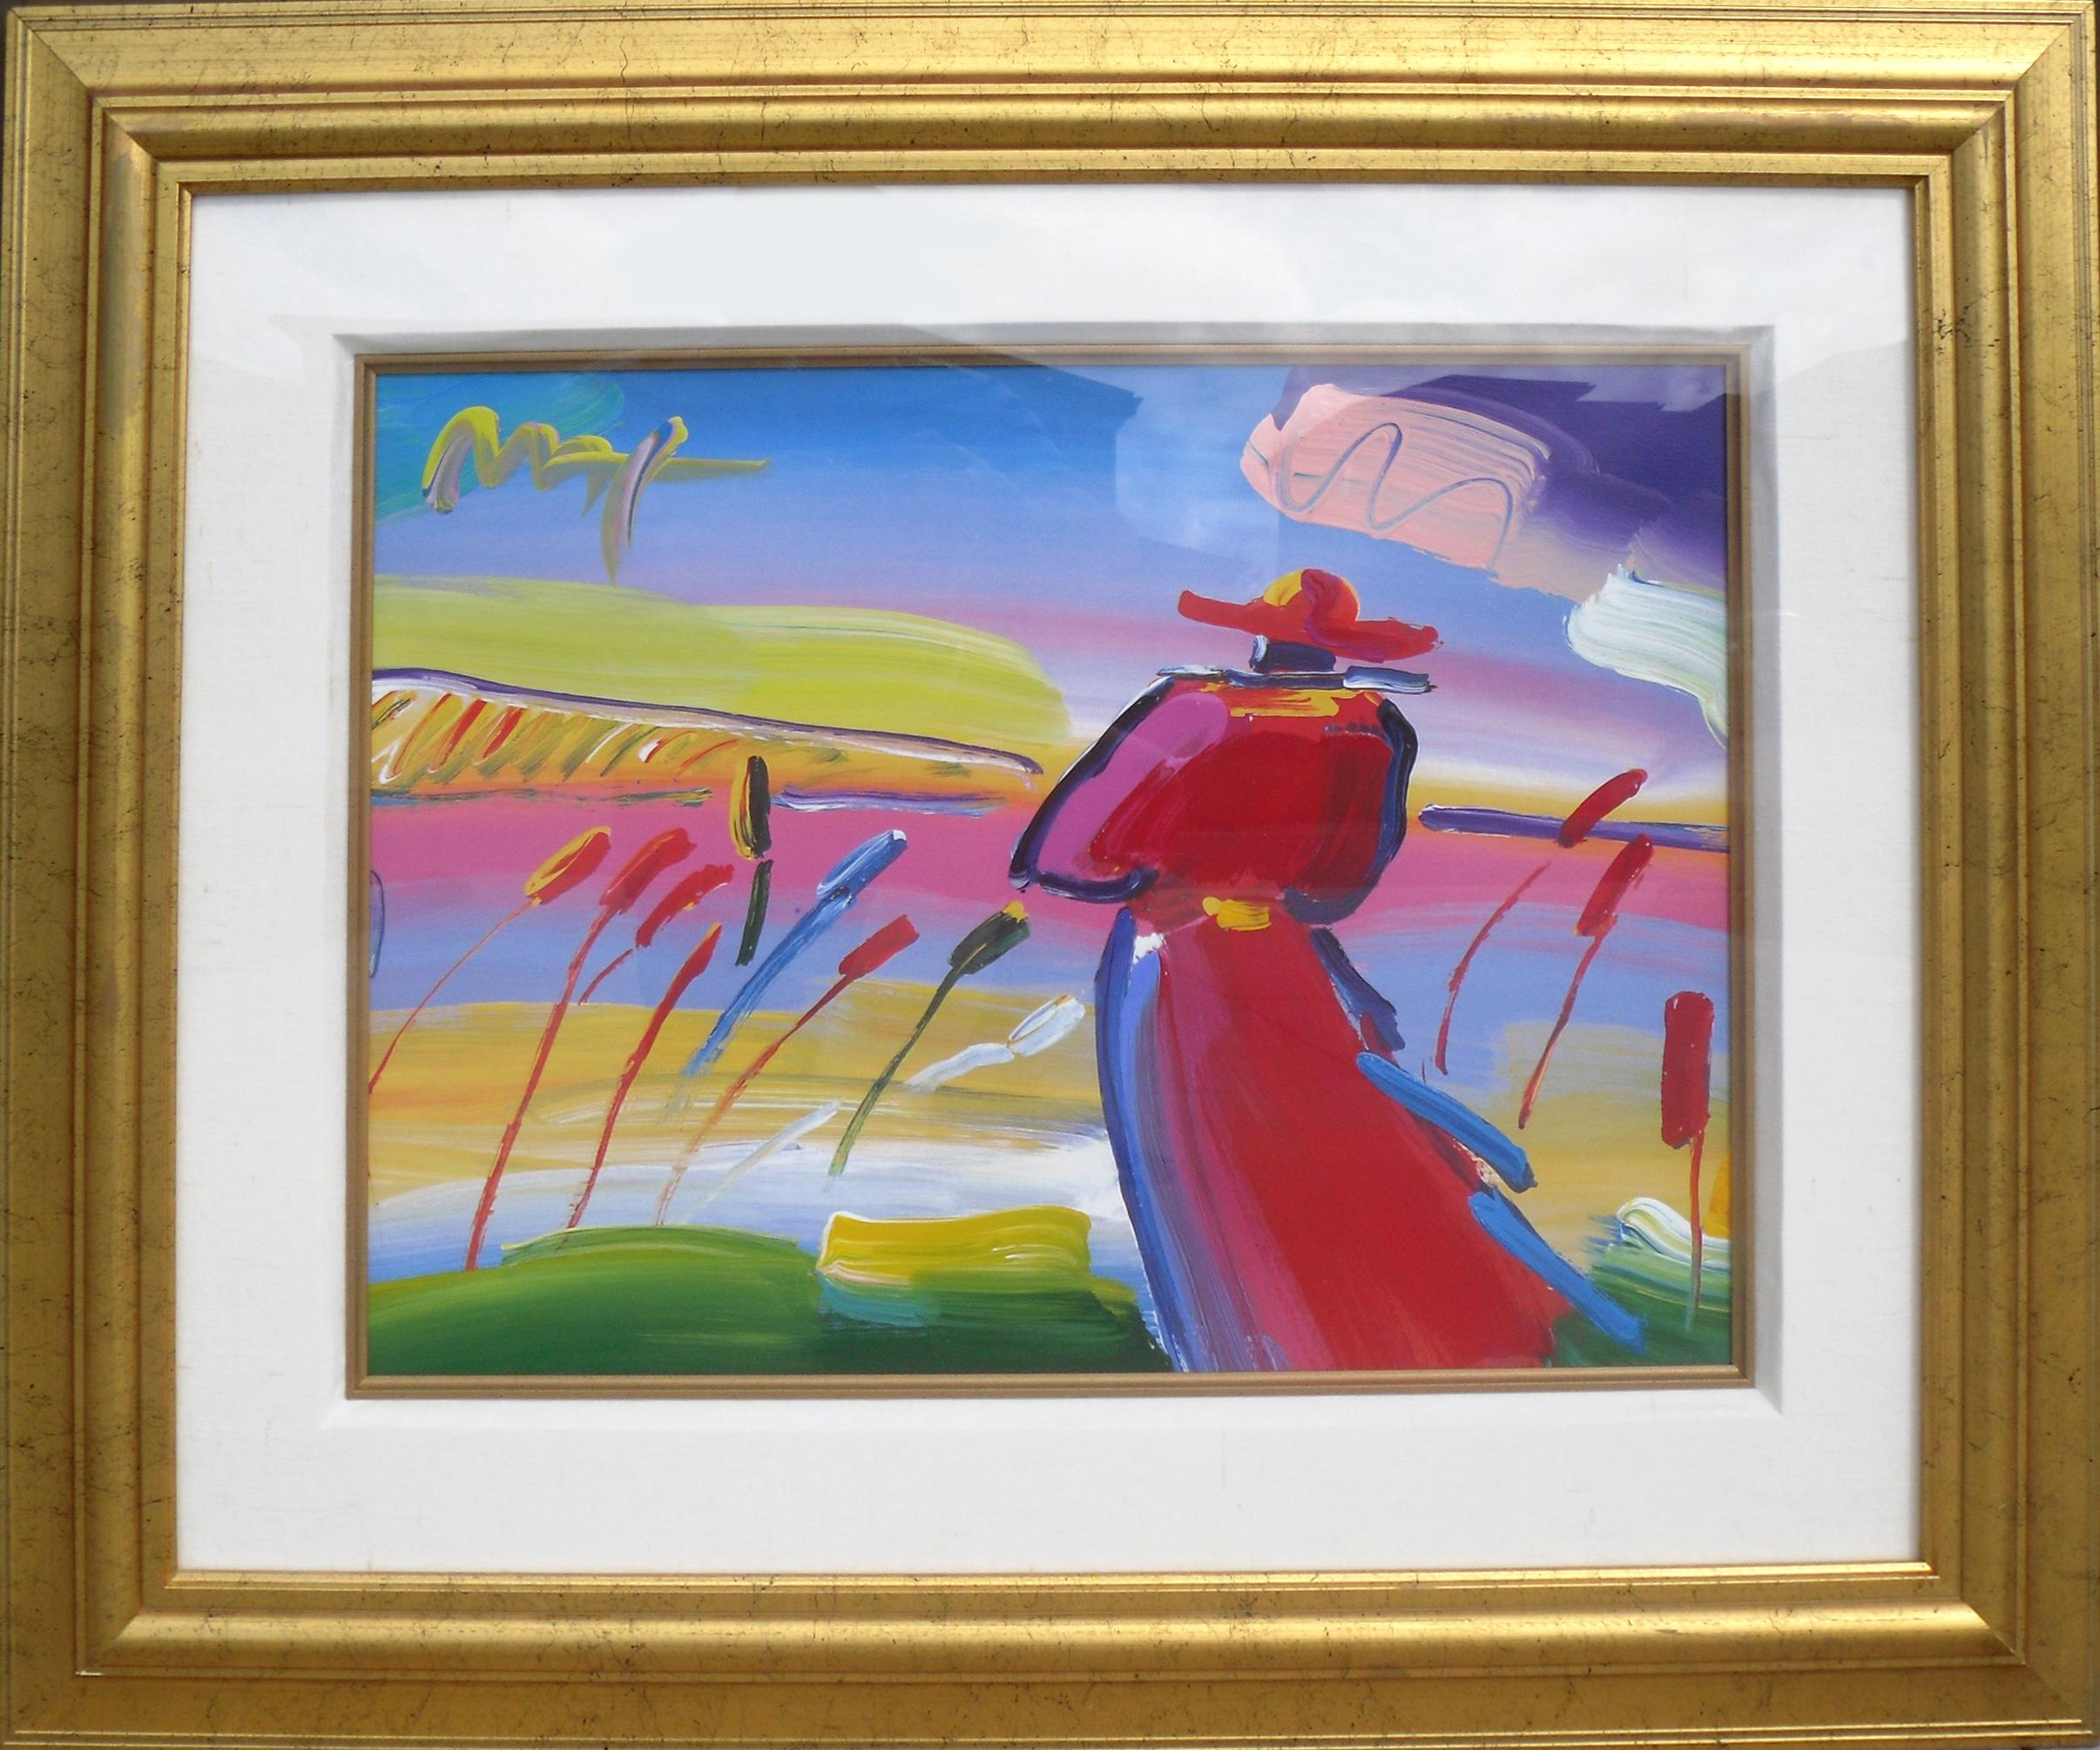 Walking in Reeds, Psychedelic Acrylic Painting by Peter Max